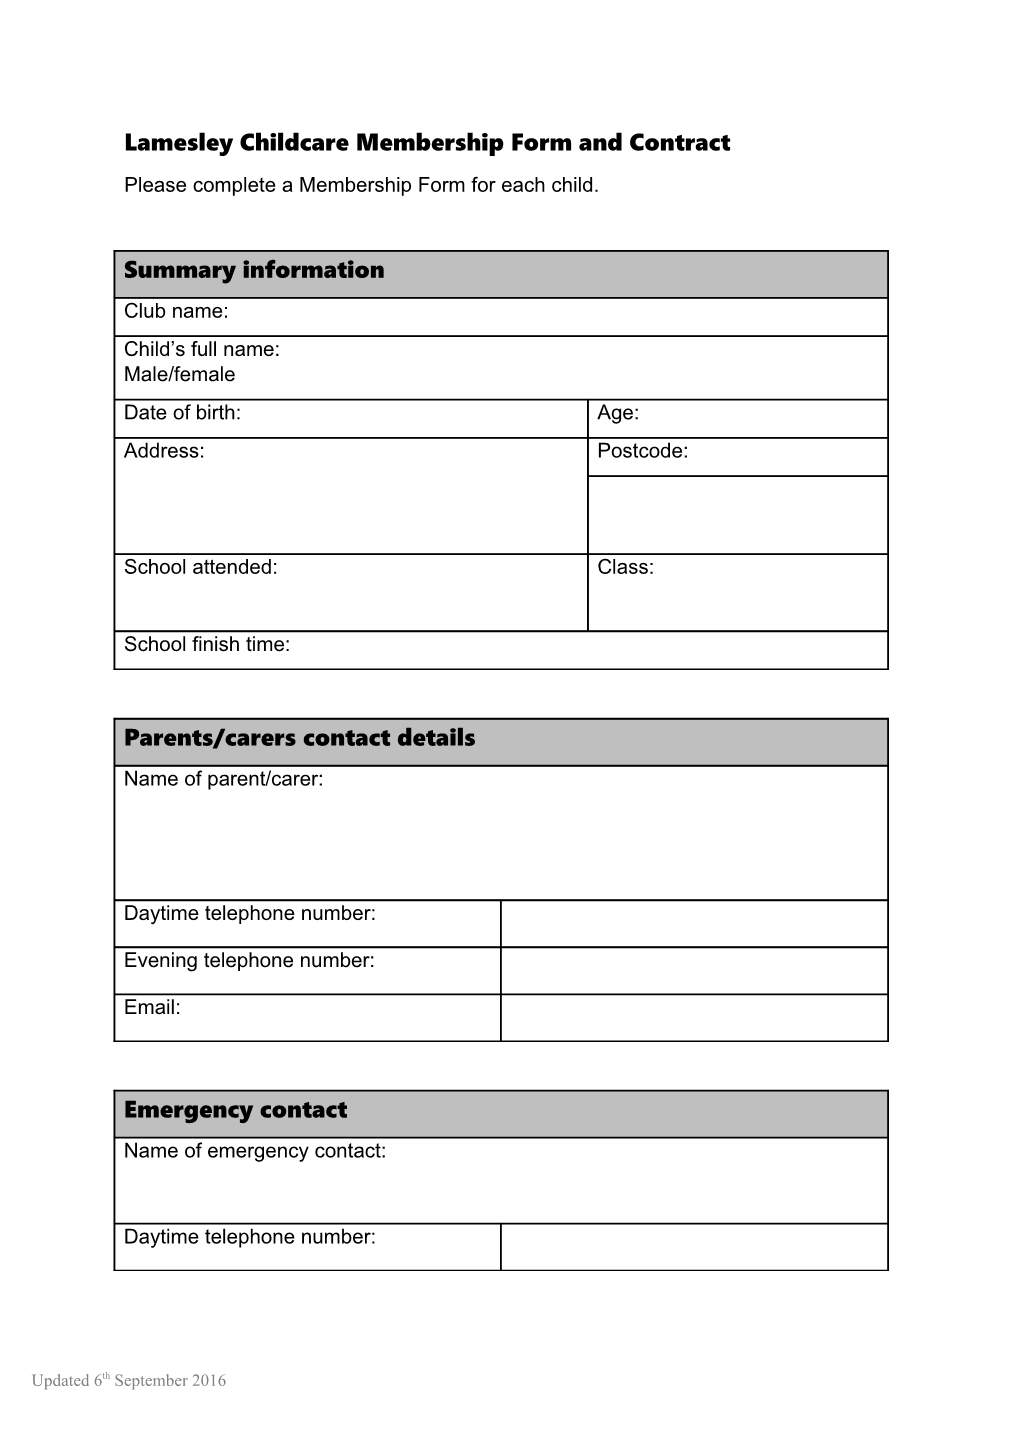 Lamesley Childcare Membership Form and Contract